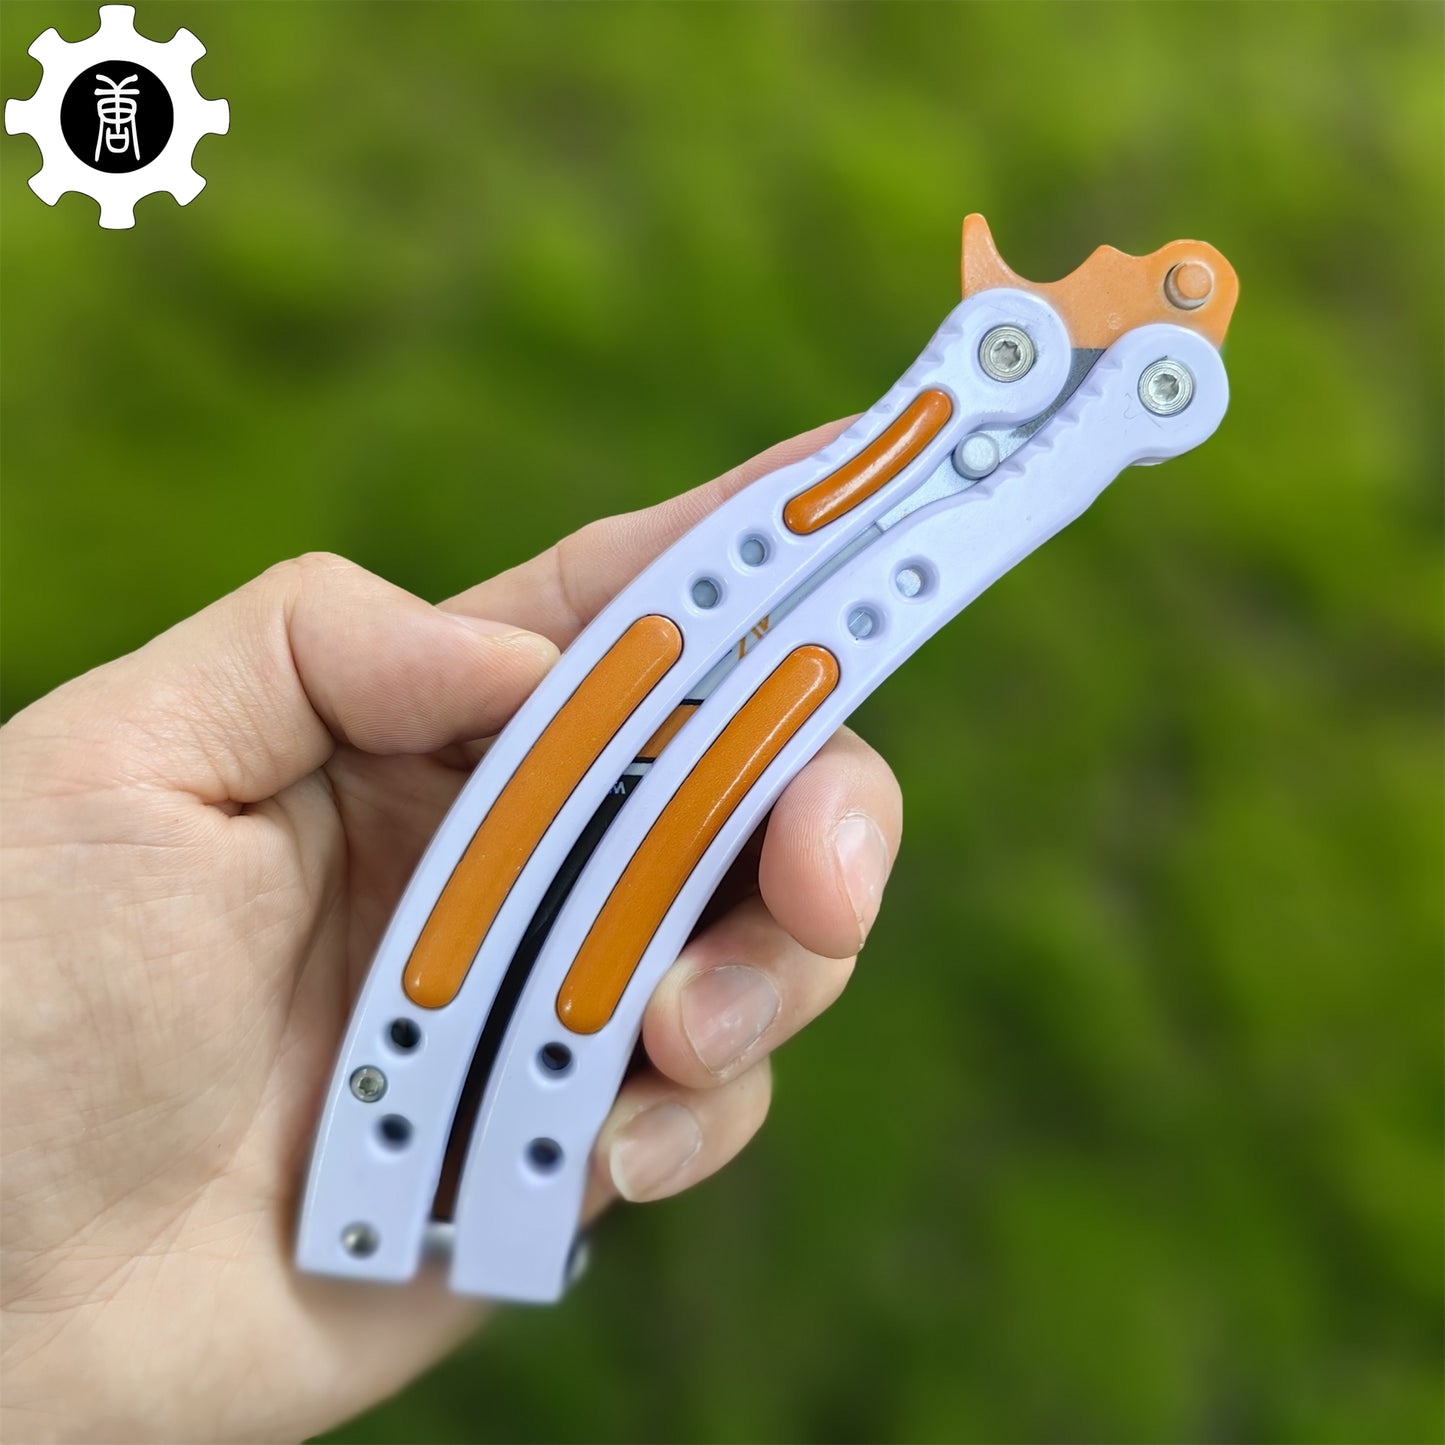 Asiimov Butterfly Knife Balisong Trainer Game Prop